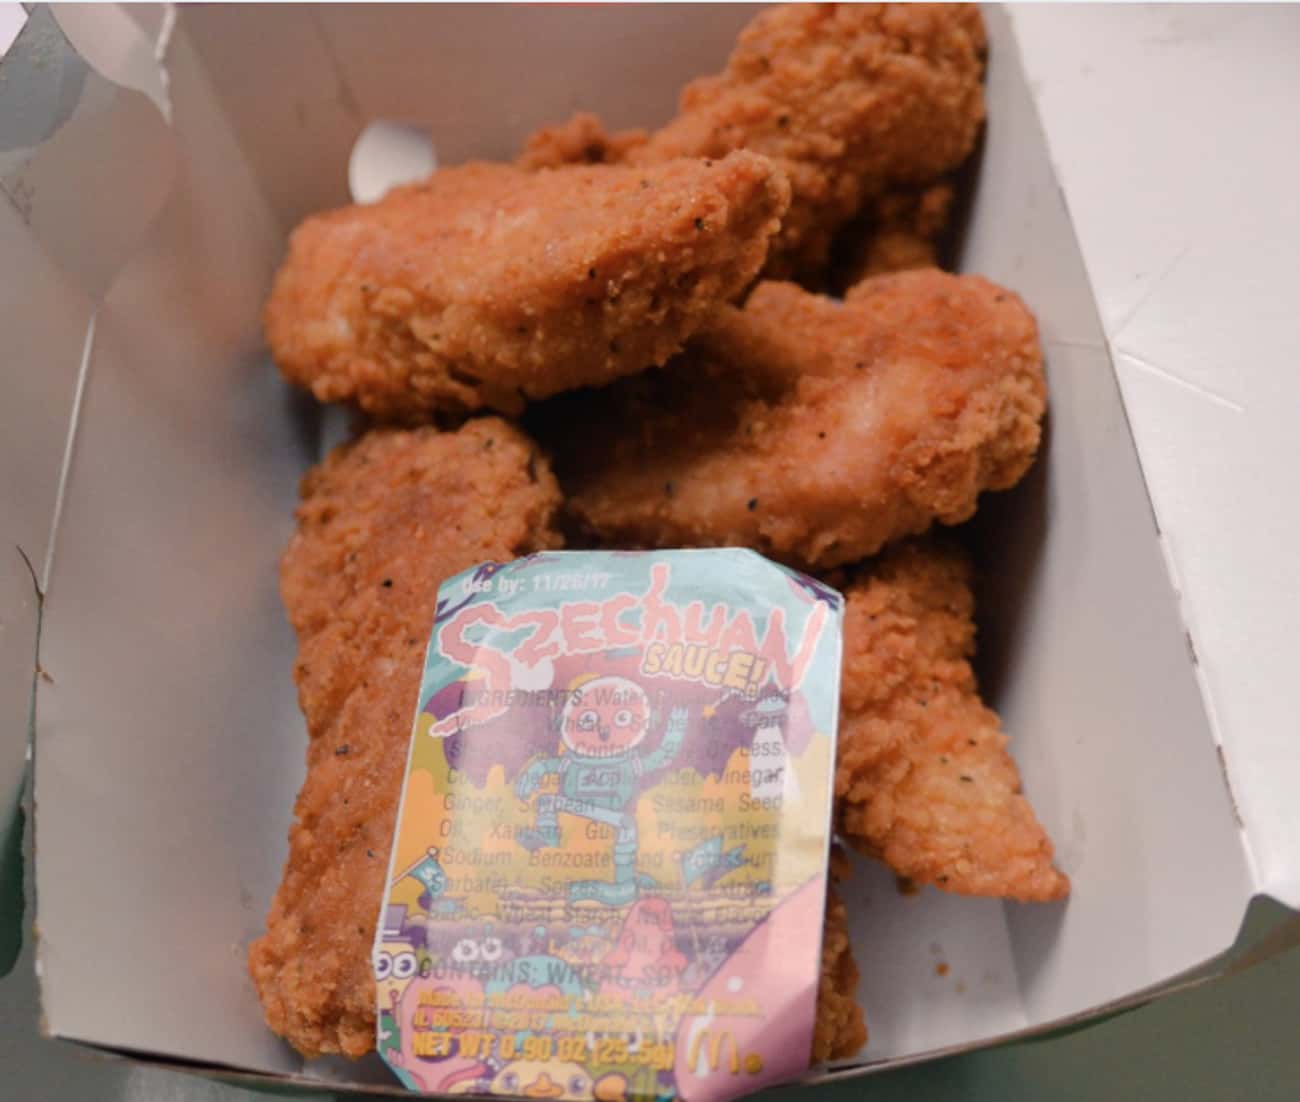 McDonald's Announced The Return Of Szechuan Sauce Two Days Before The Release